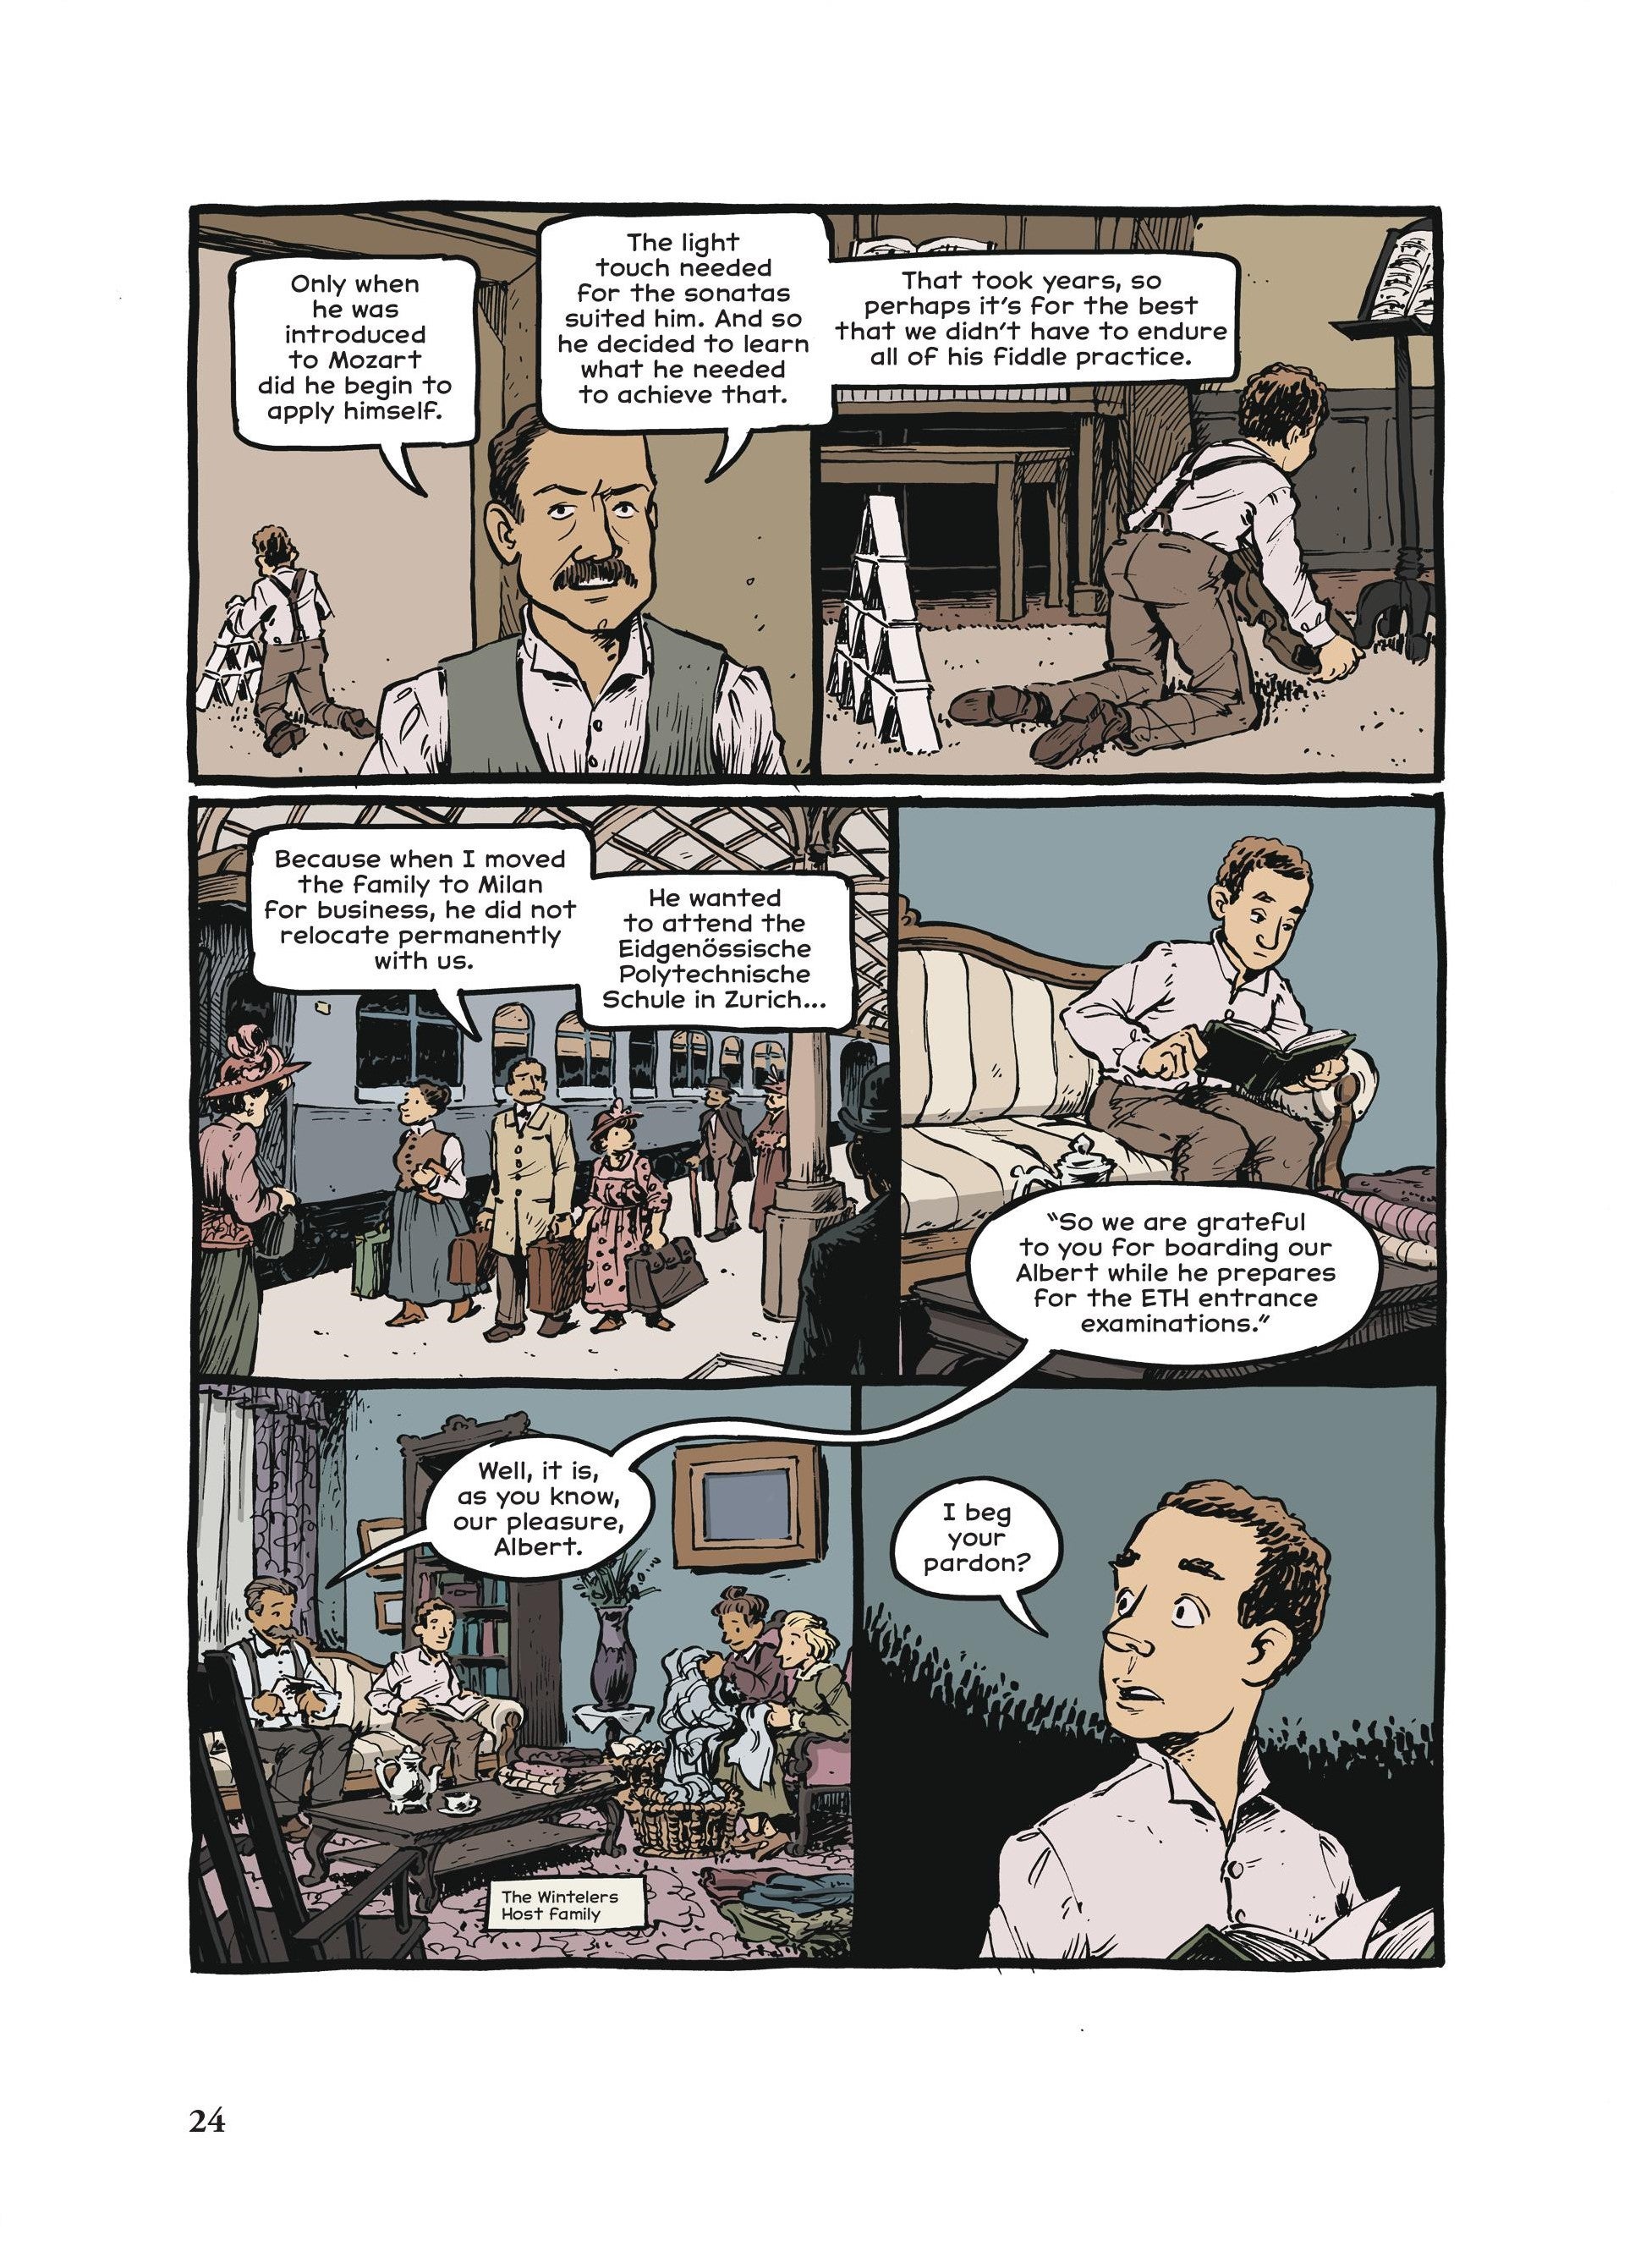 Comics page featuring Einstein's father saying that he did not relocate with the family, so he could attend a specific school,and Einstein being distracted as his host family speaks to him